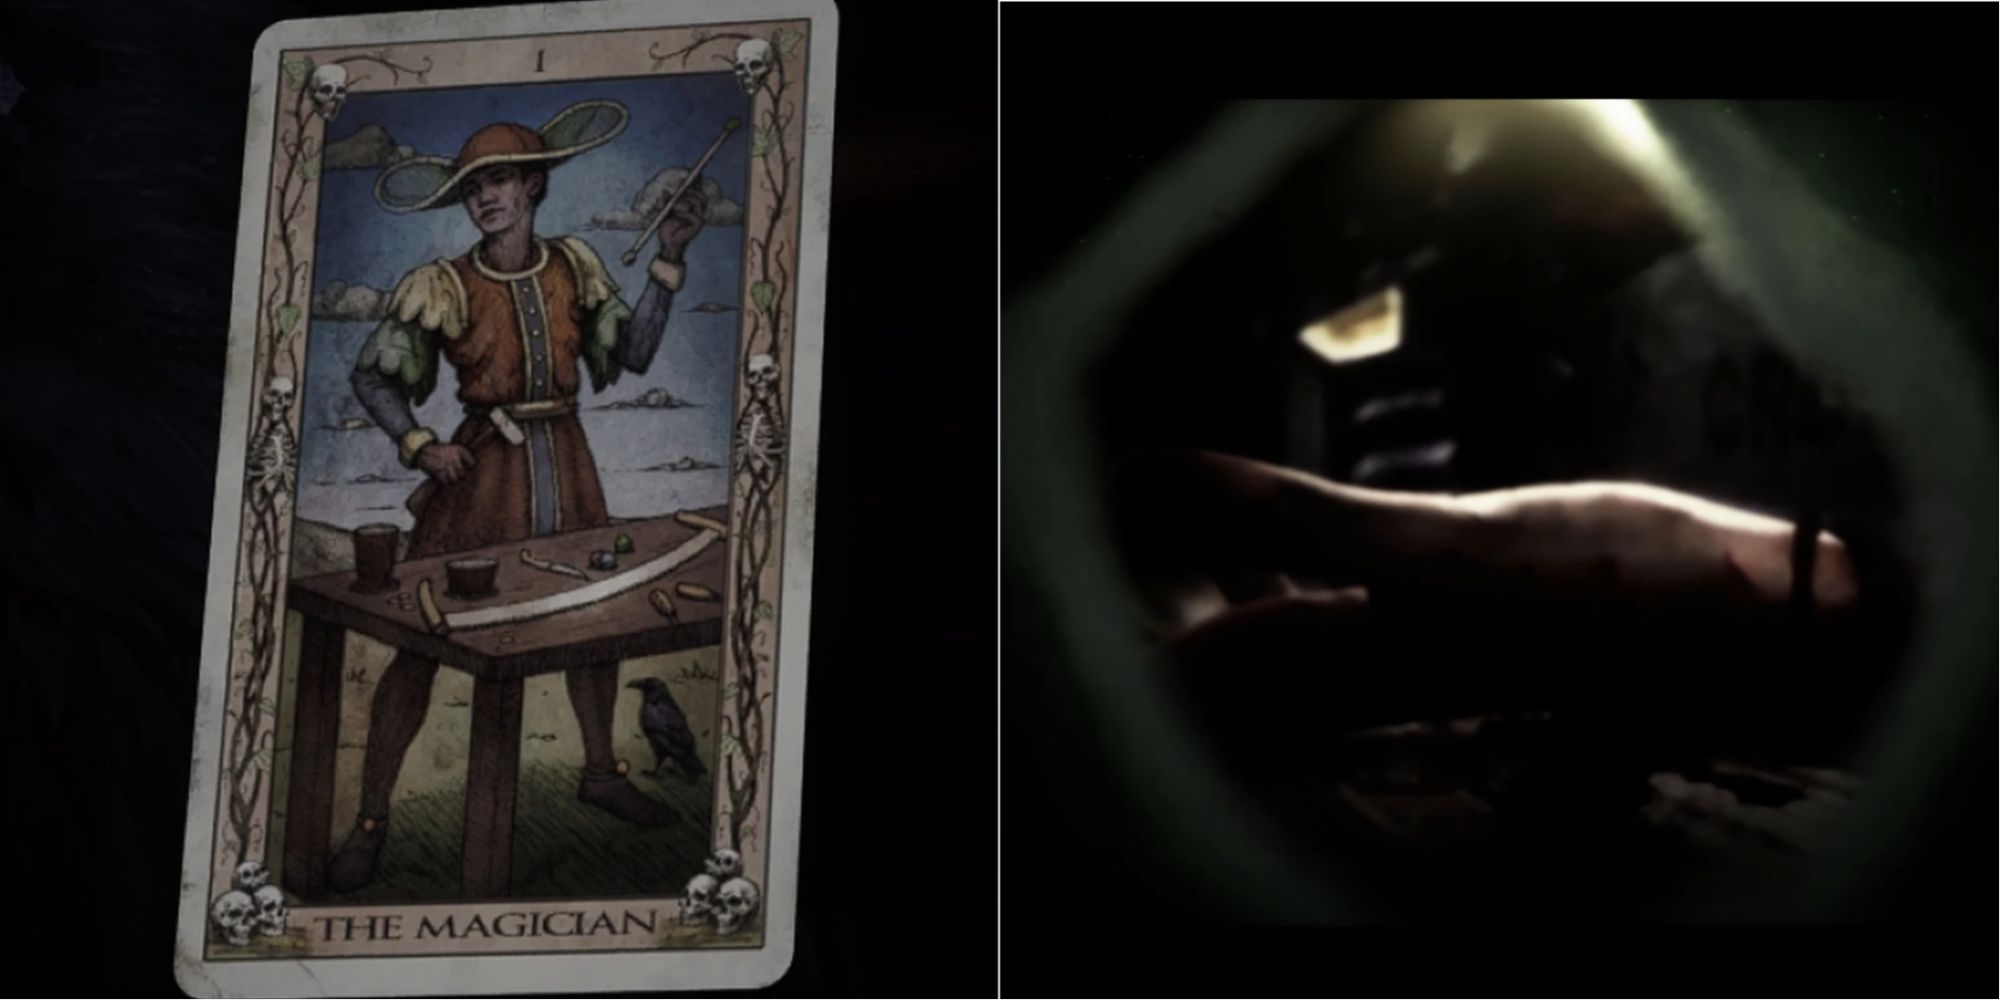 The Quarry's Major arcana rendition of the tarot card The Magician. On the right Ryan cuts Dylan's hand with a chainsaw